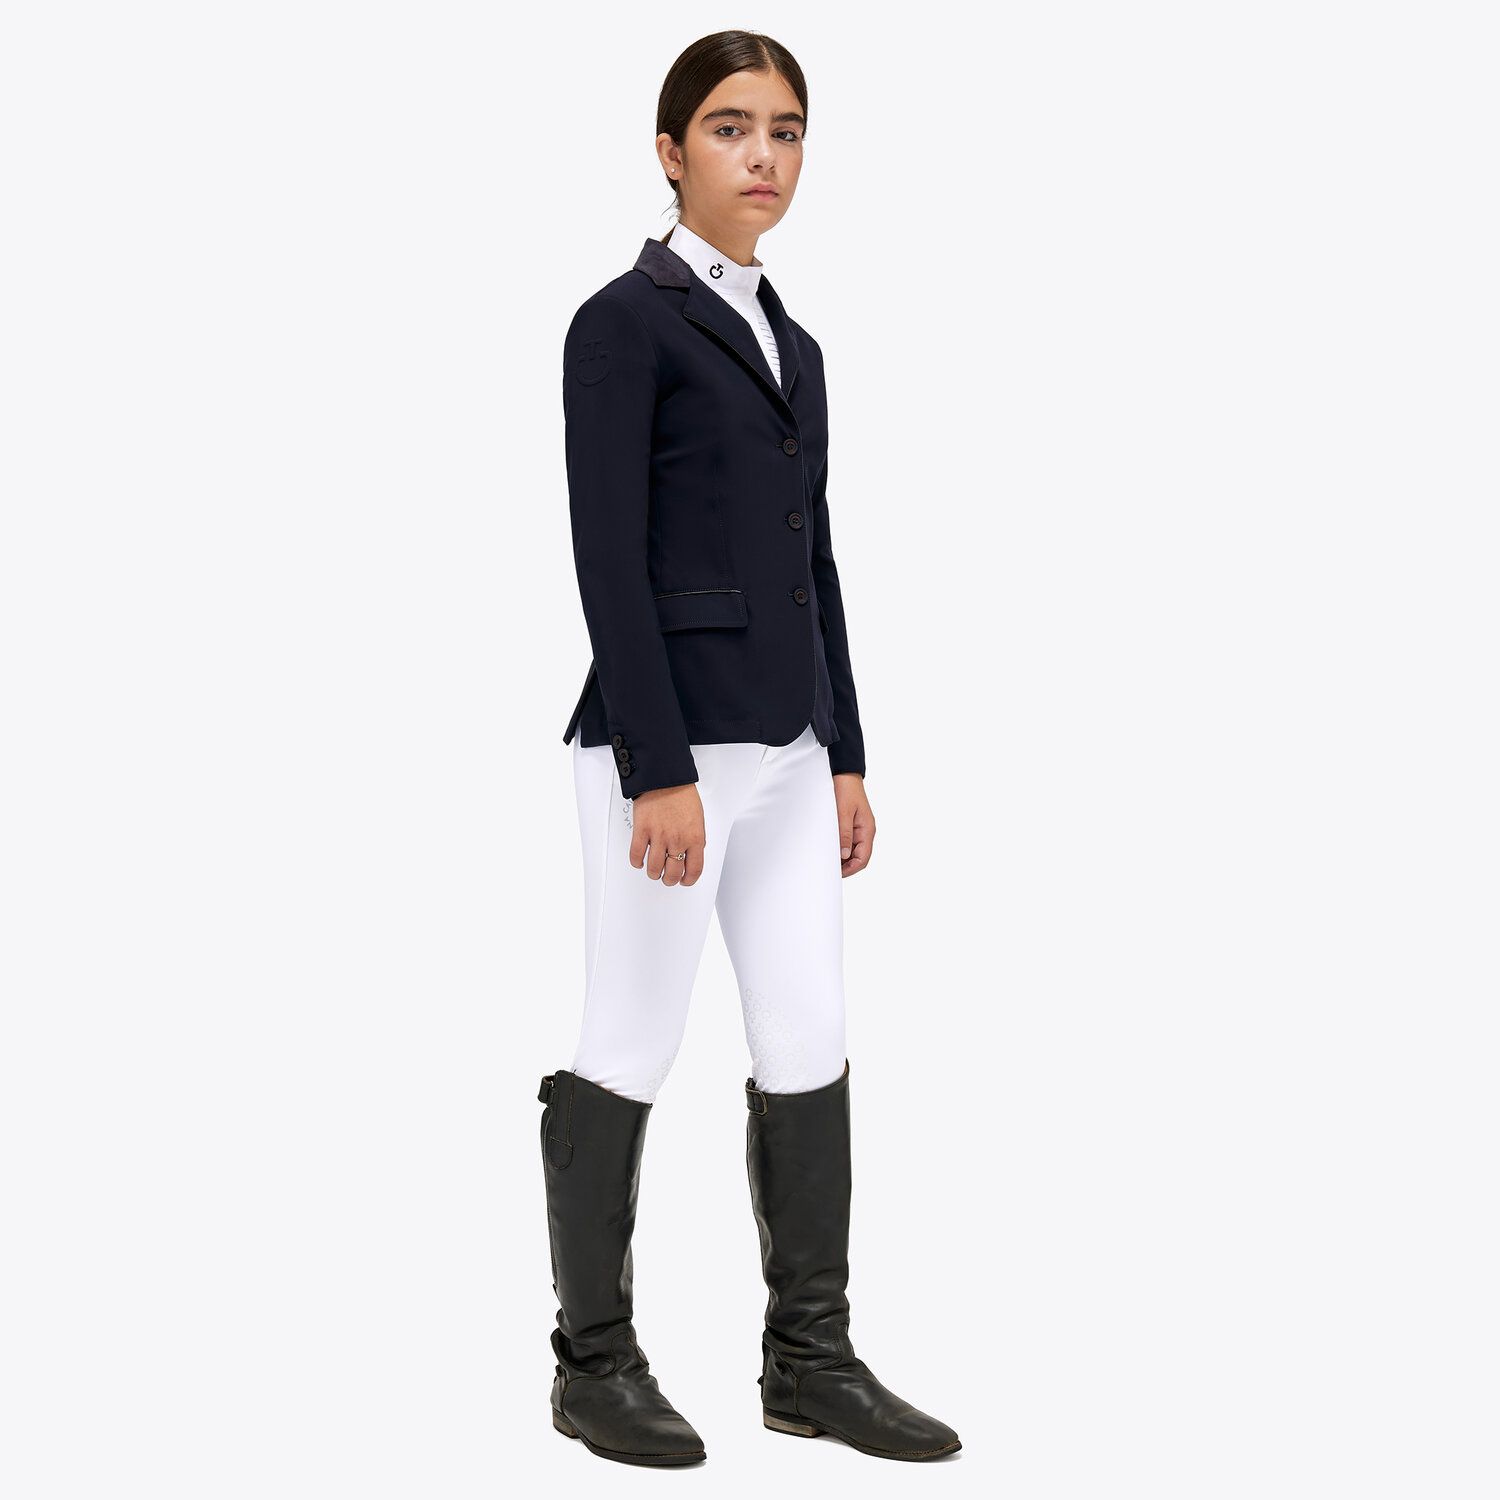 Cavalleria Toscana Girl's competition riding jacket. NAVY-2